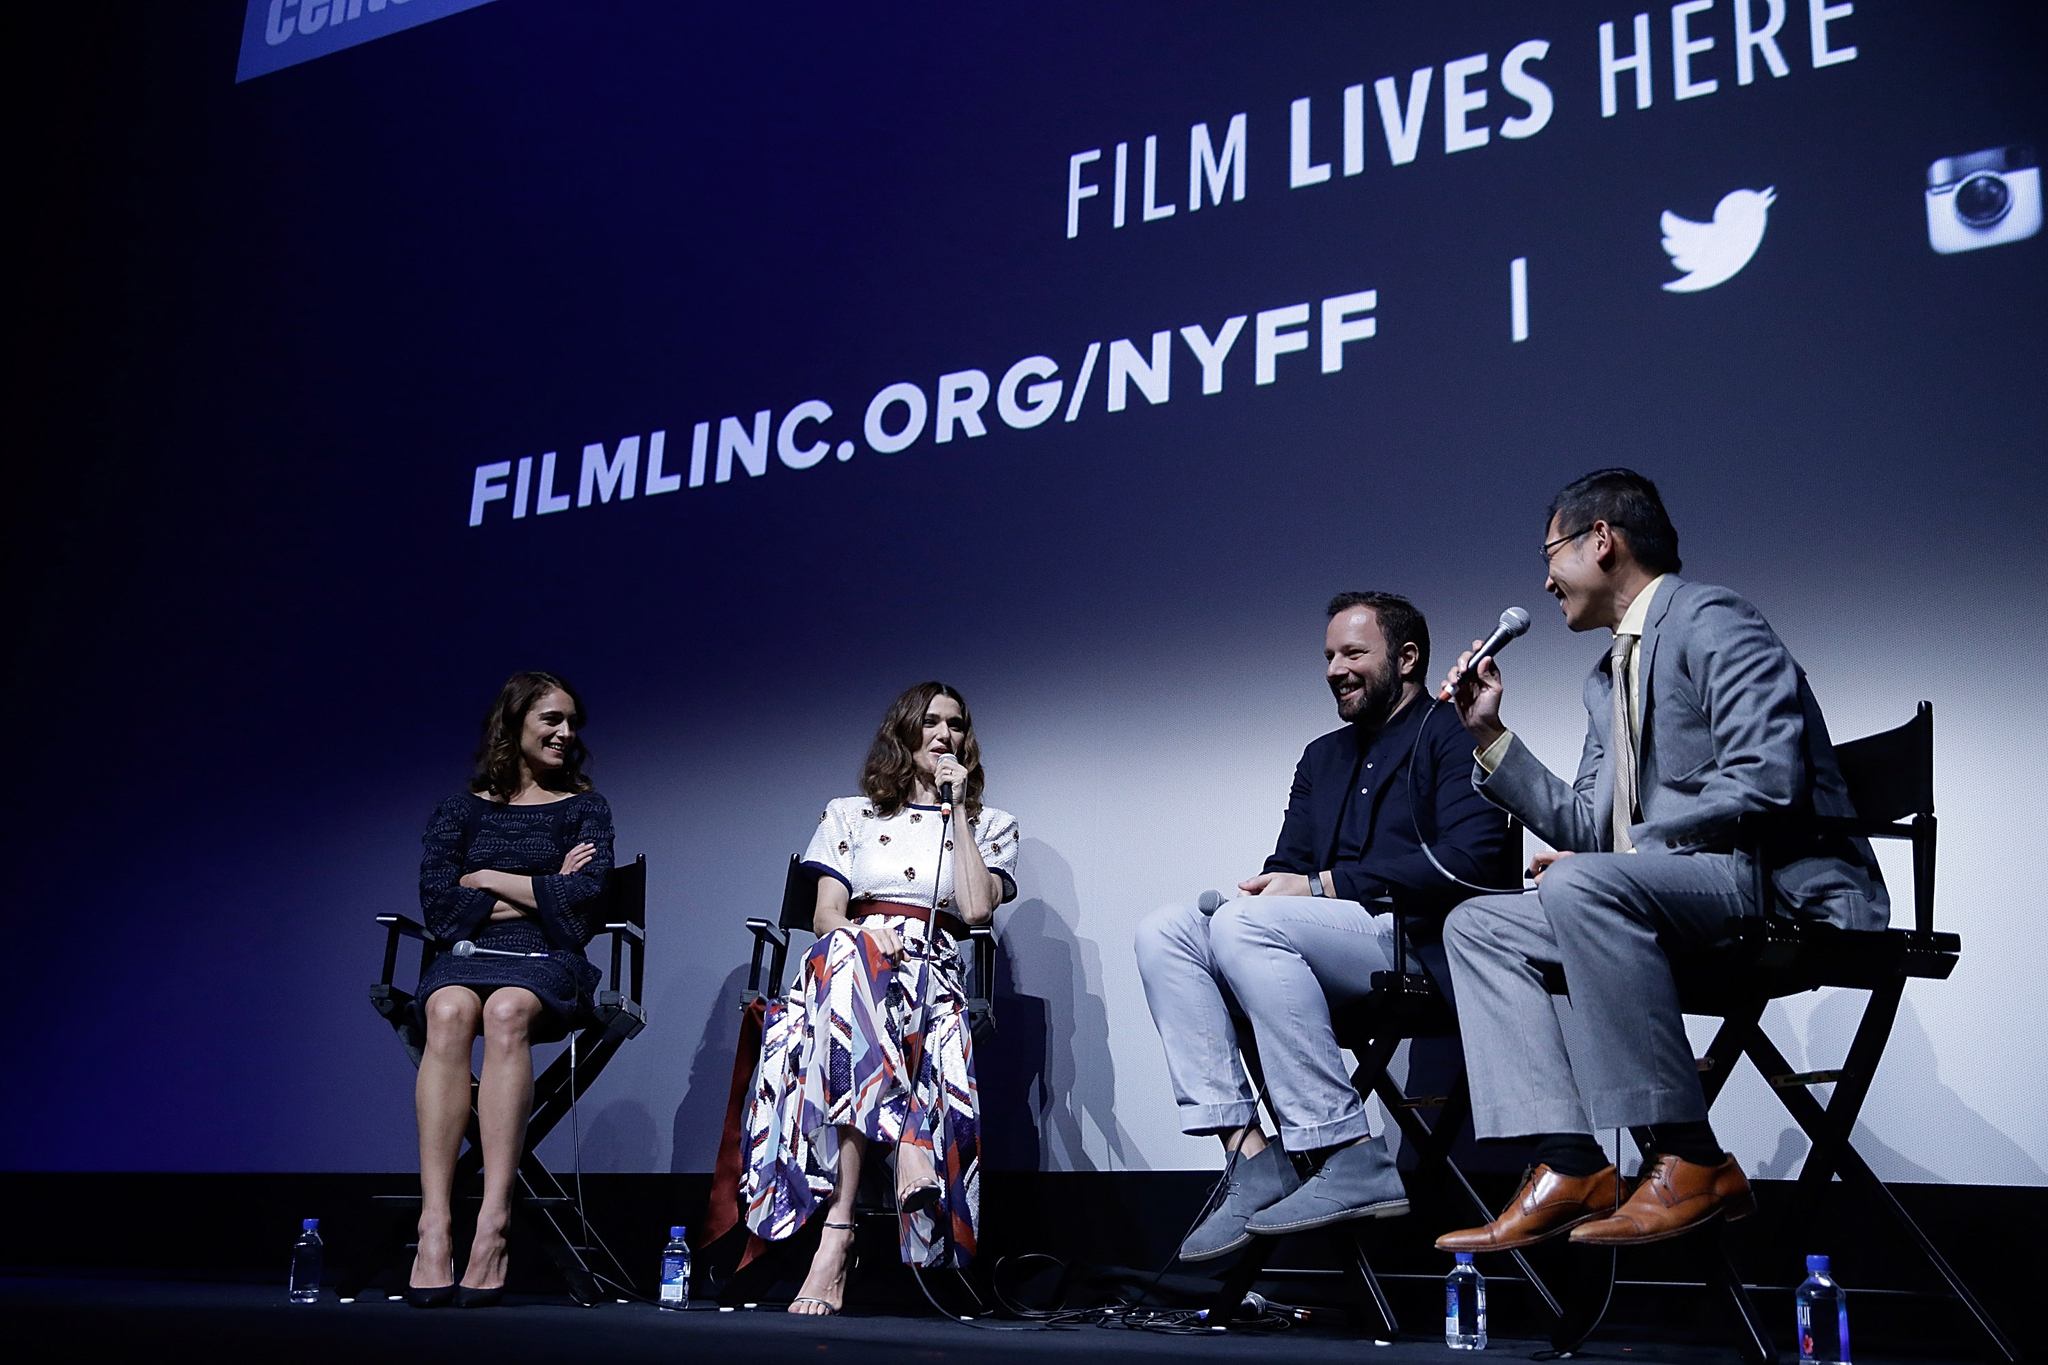 Rachel Weisz, Yorgos Lanthimos and Ariane Labed at event of The Lobster (2015)